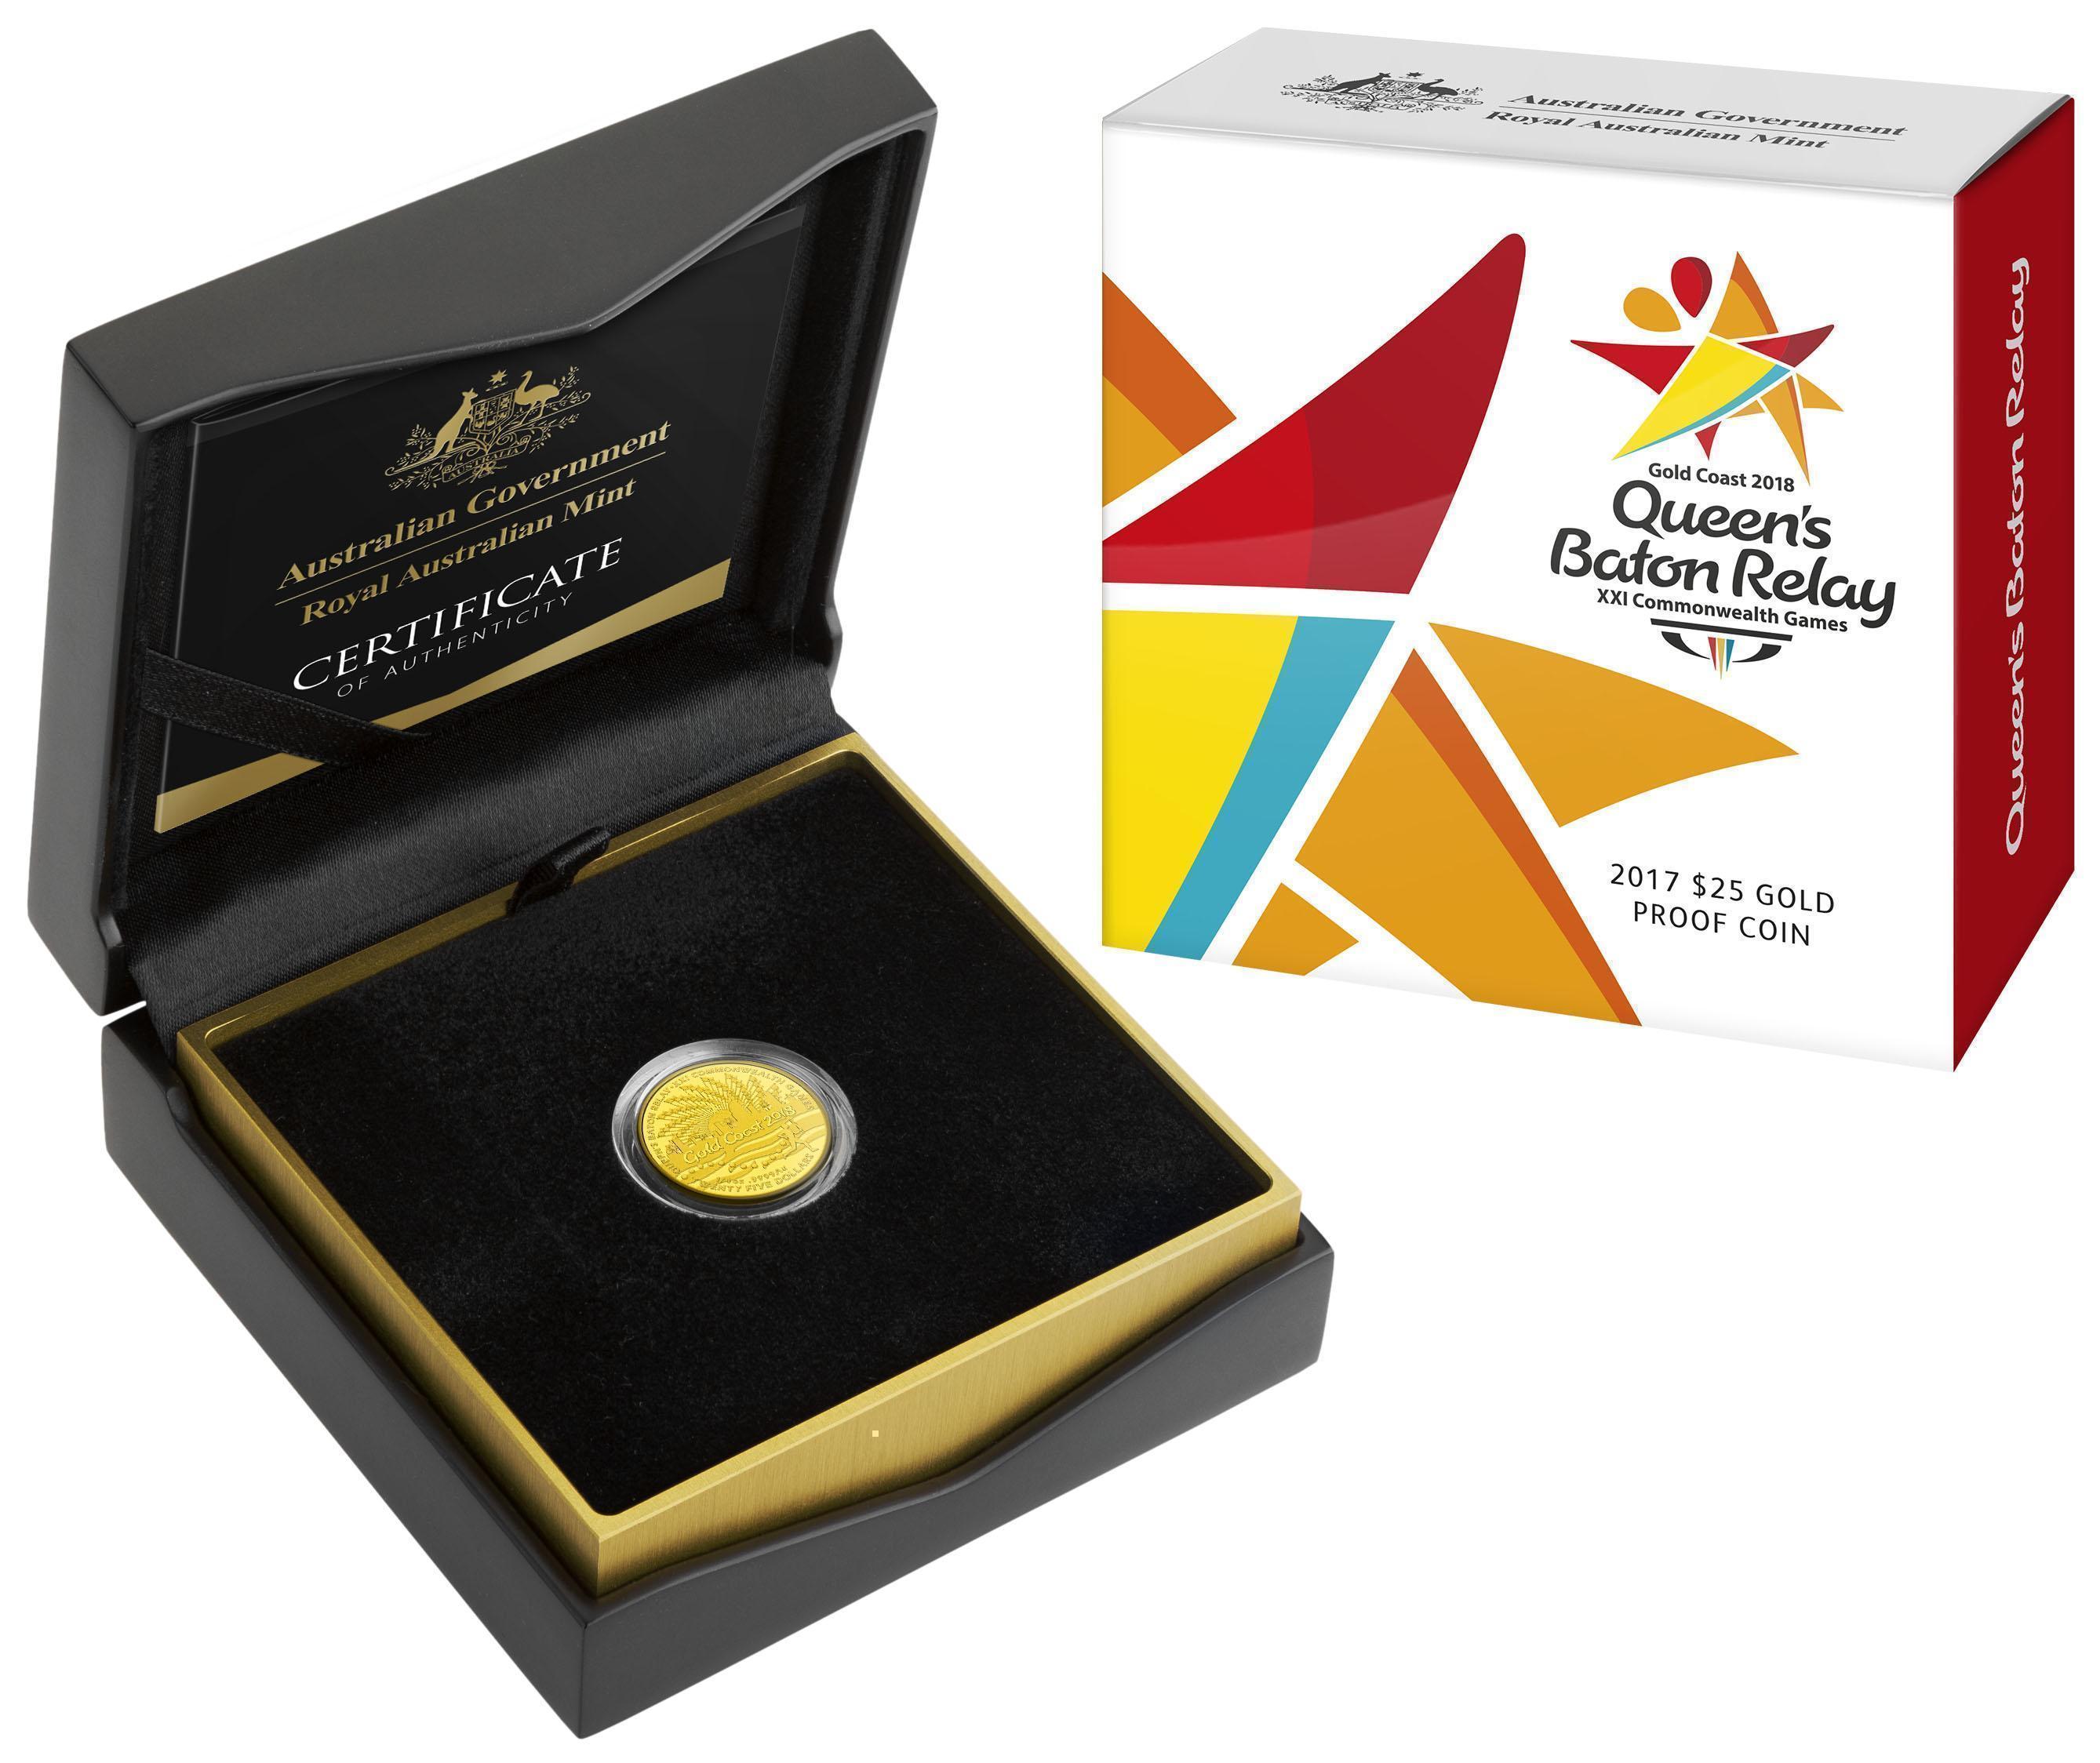 2017 Gold Coast Commonwealth Games Queen's Baton Relay $25 Gold Proof Coin